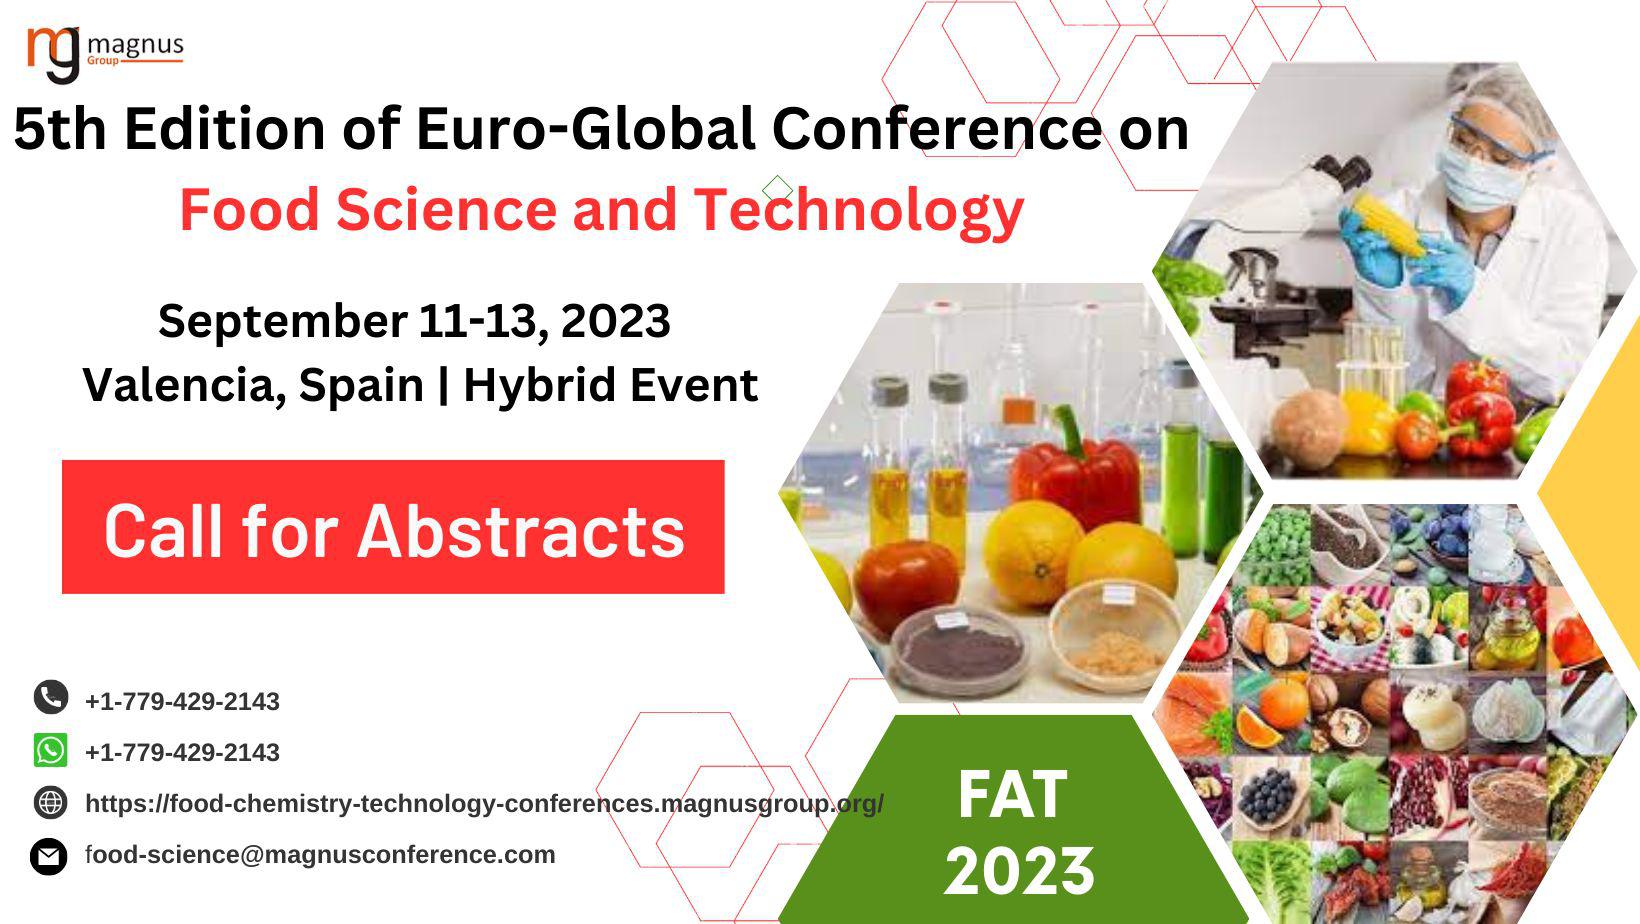 5th Edition of Euro-Global Conference on Food Science and Technology